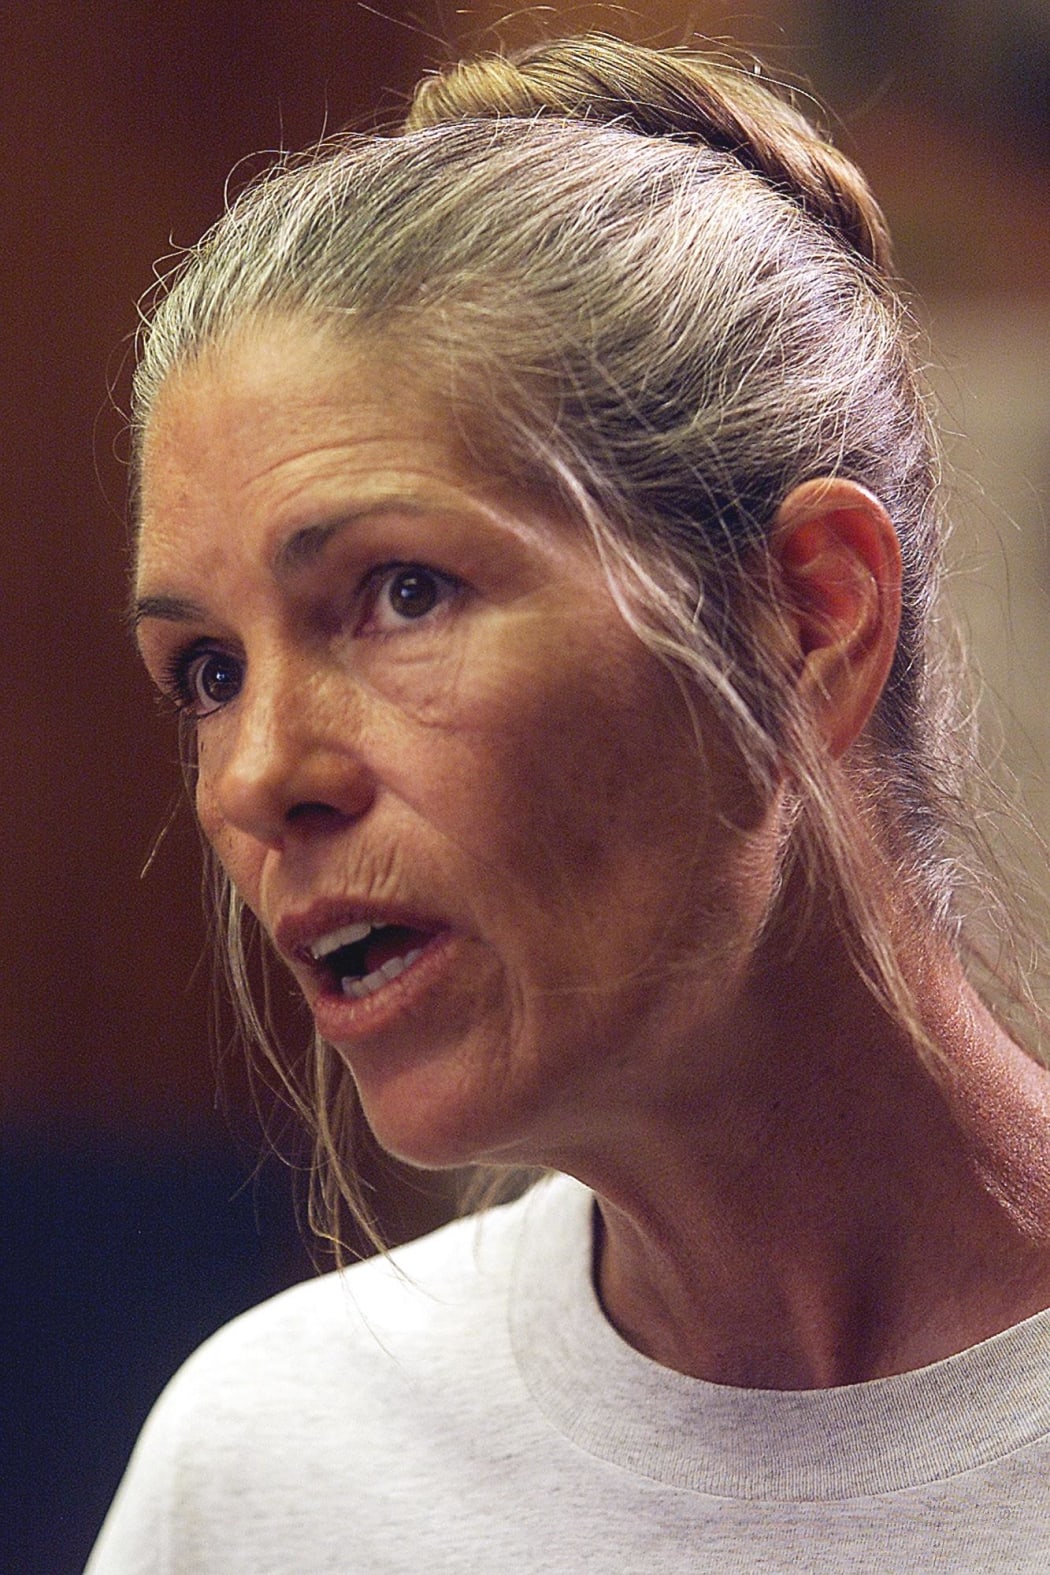 Leslie Van Houten expresses remorse in the killings of the LaBianca couple to members of the Board of Prison Terms commissioners during her parole hearing 28 June 2002.